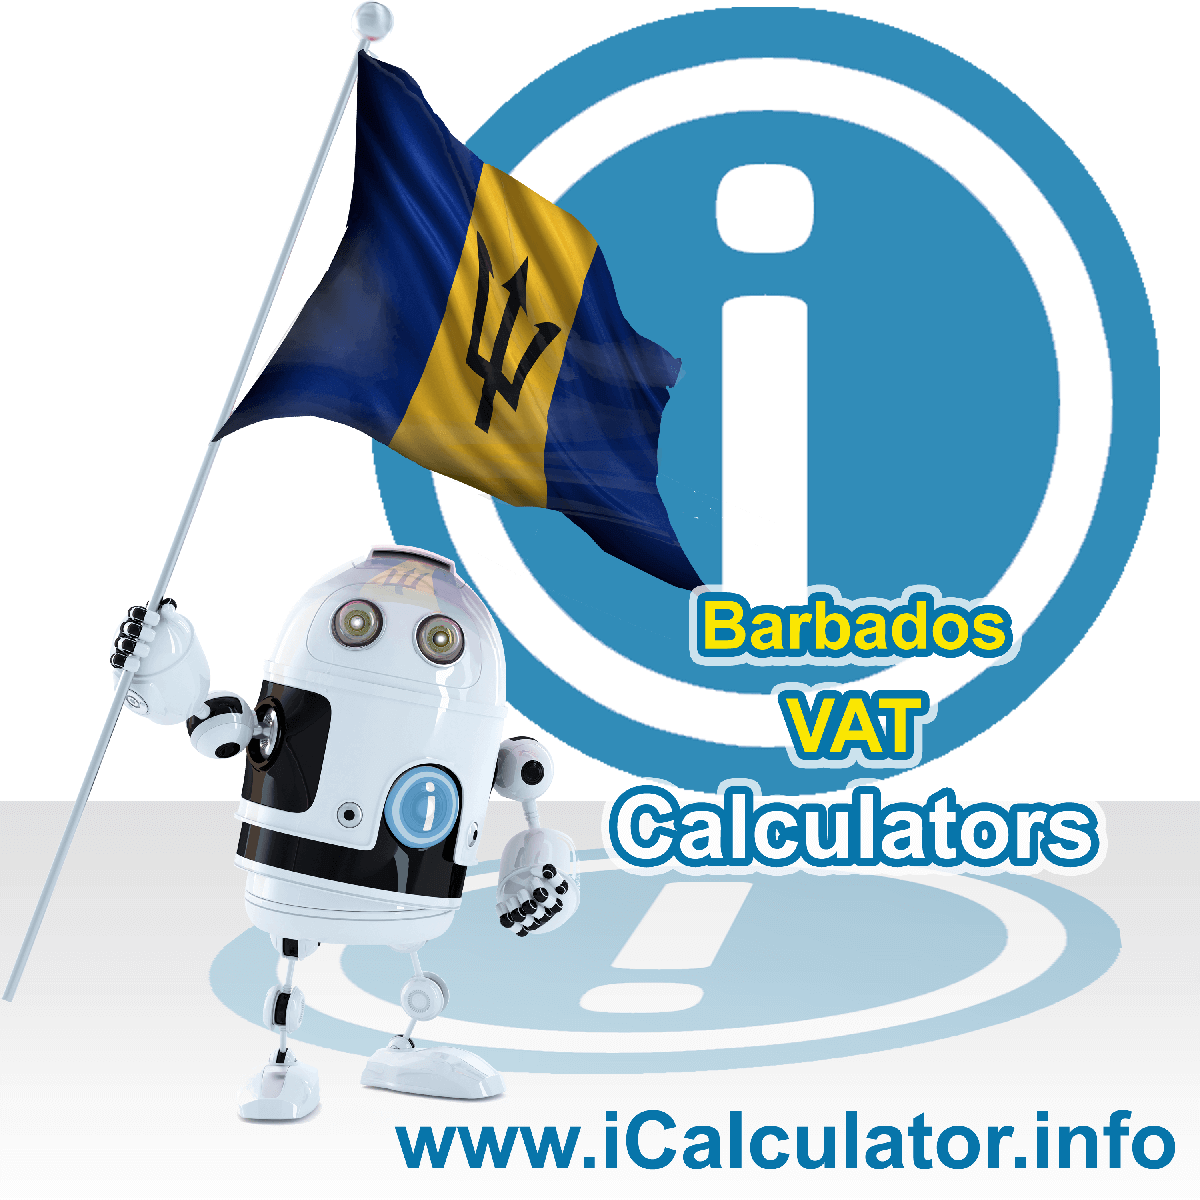 Barbados VAT Calculator. This image shows the Barbados flag and information relating to the VAT formula used for calculating Value Added Tax in Barbados using the Barbados VAT Calculator in 2023